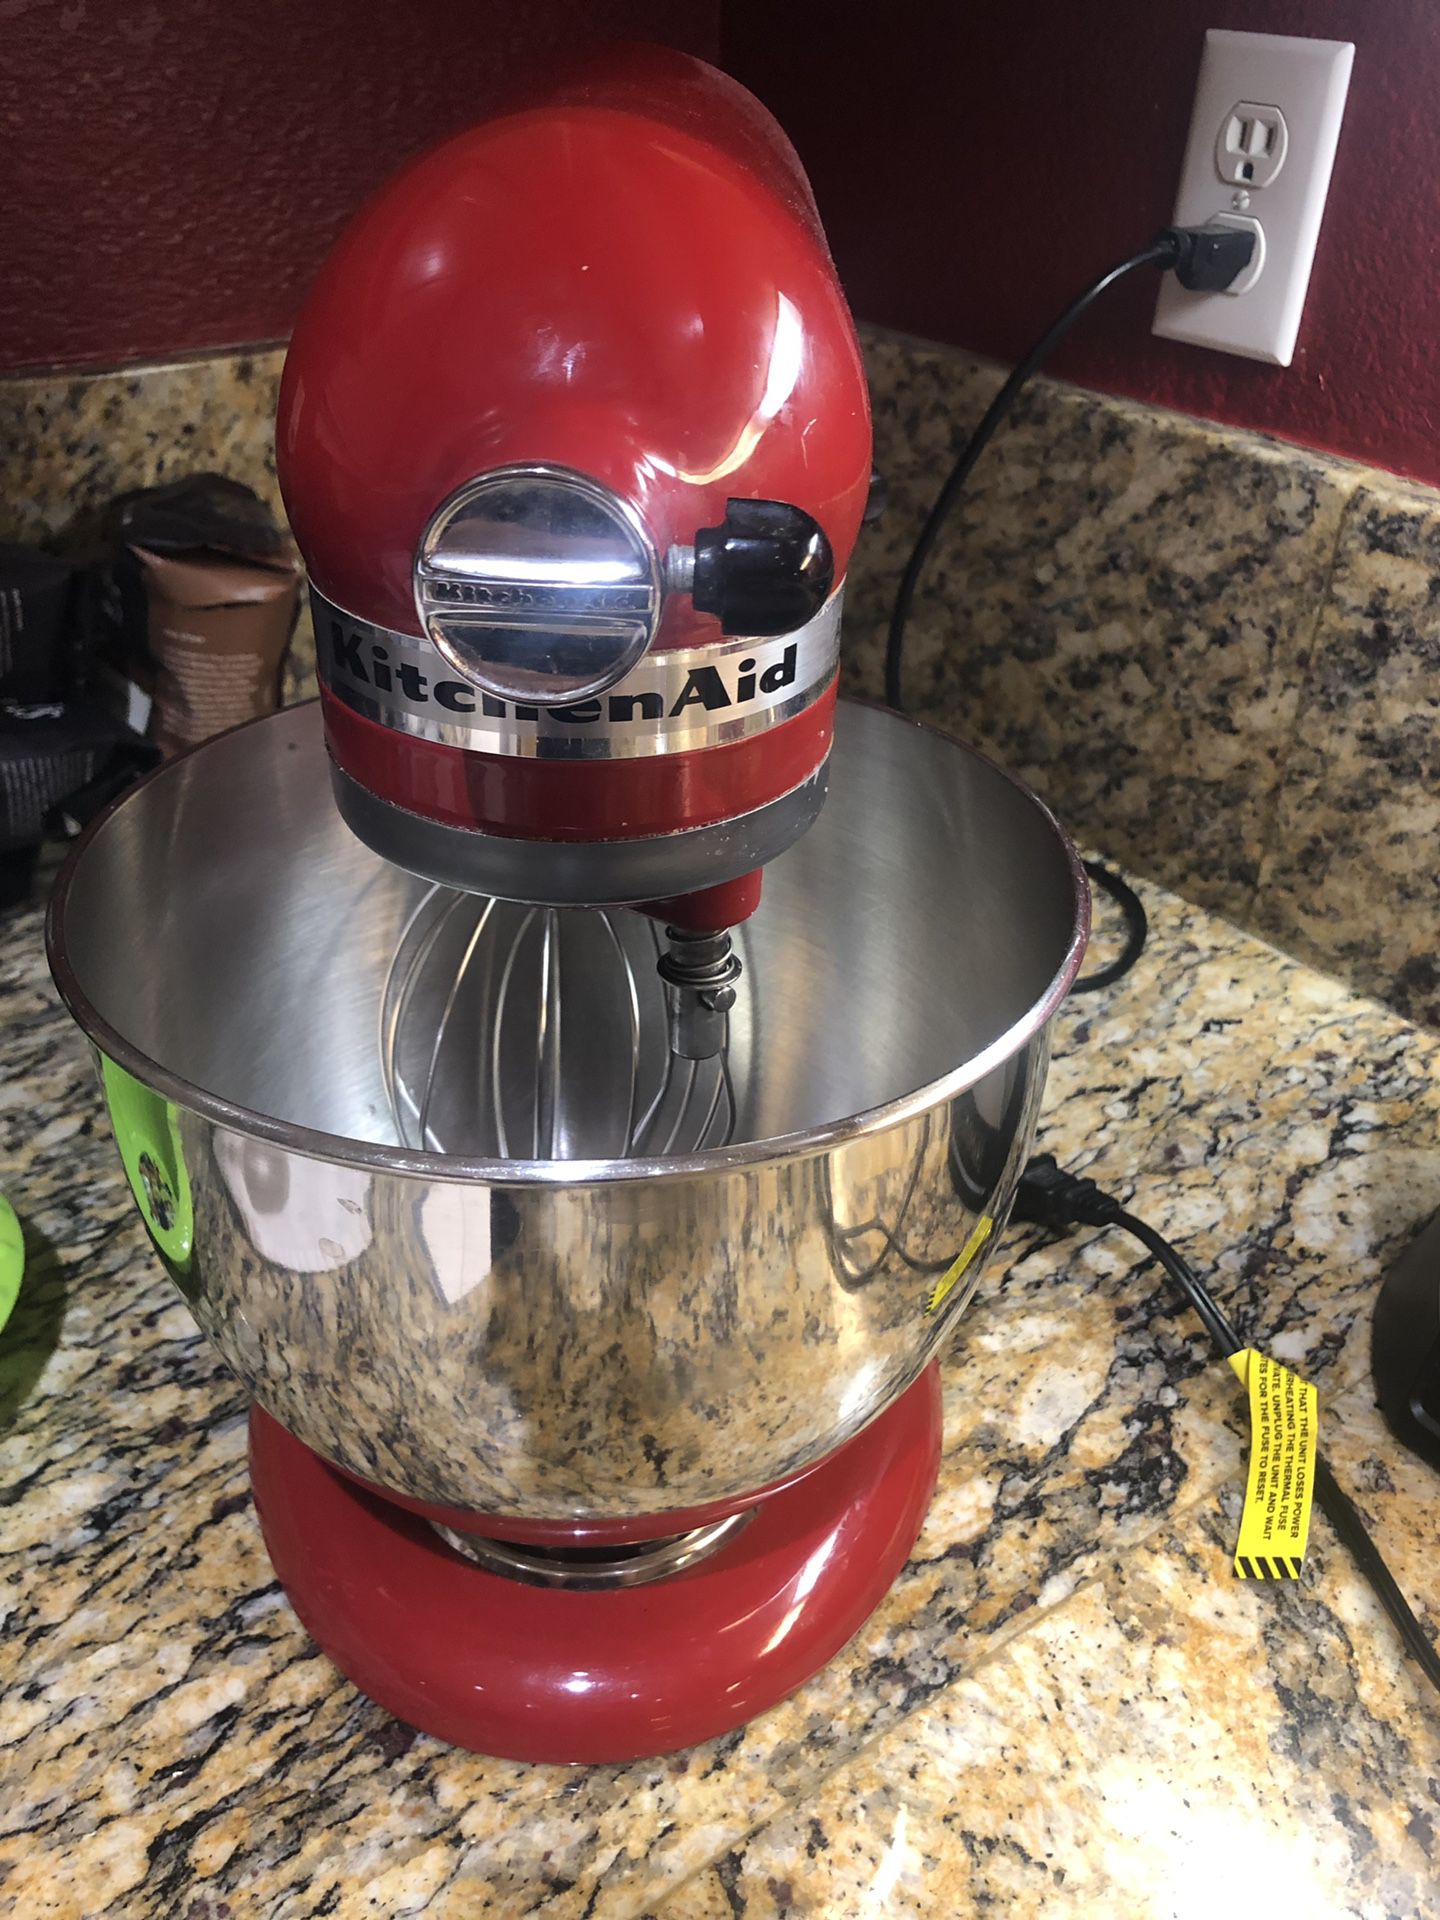 Kitchen Aid artisan series . 5 quart. tilt head stand mixer in red.10 speeds. Comes with the 2 attachments.